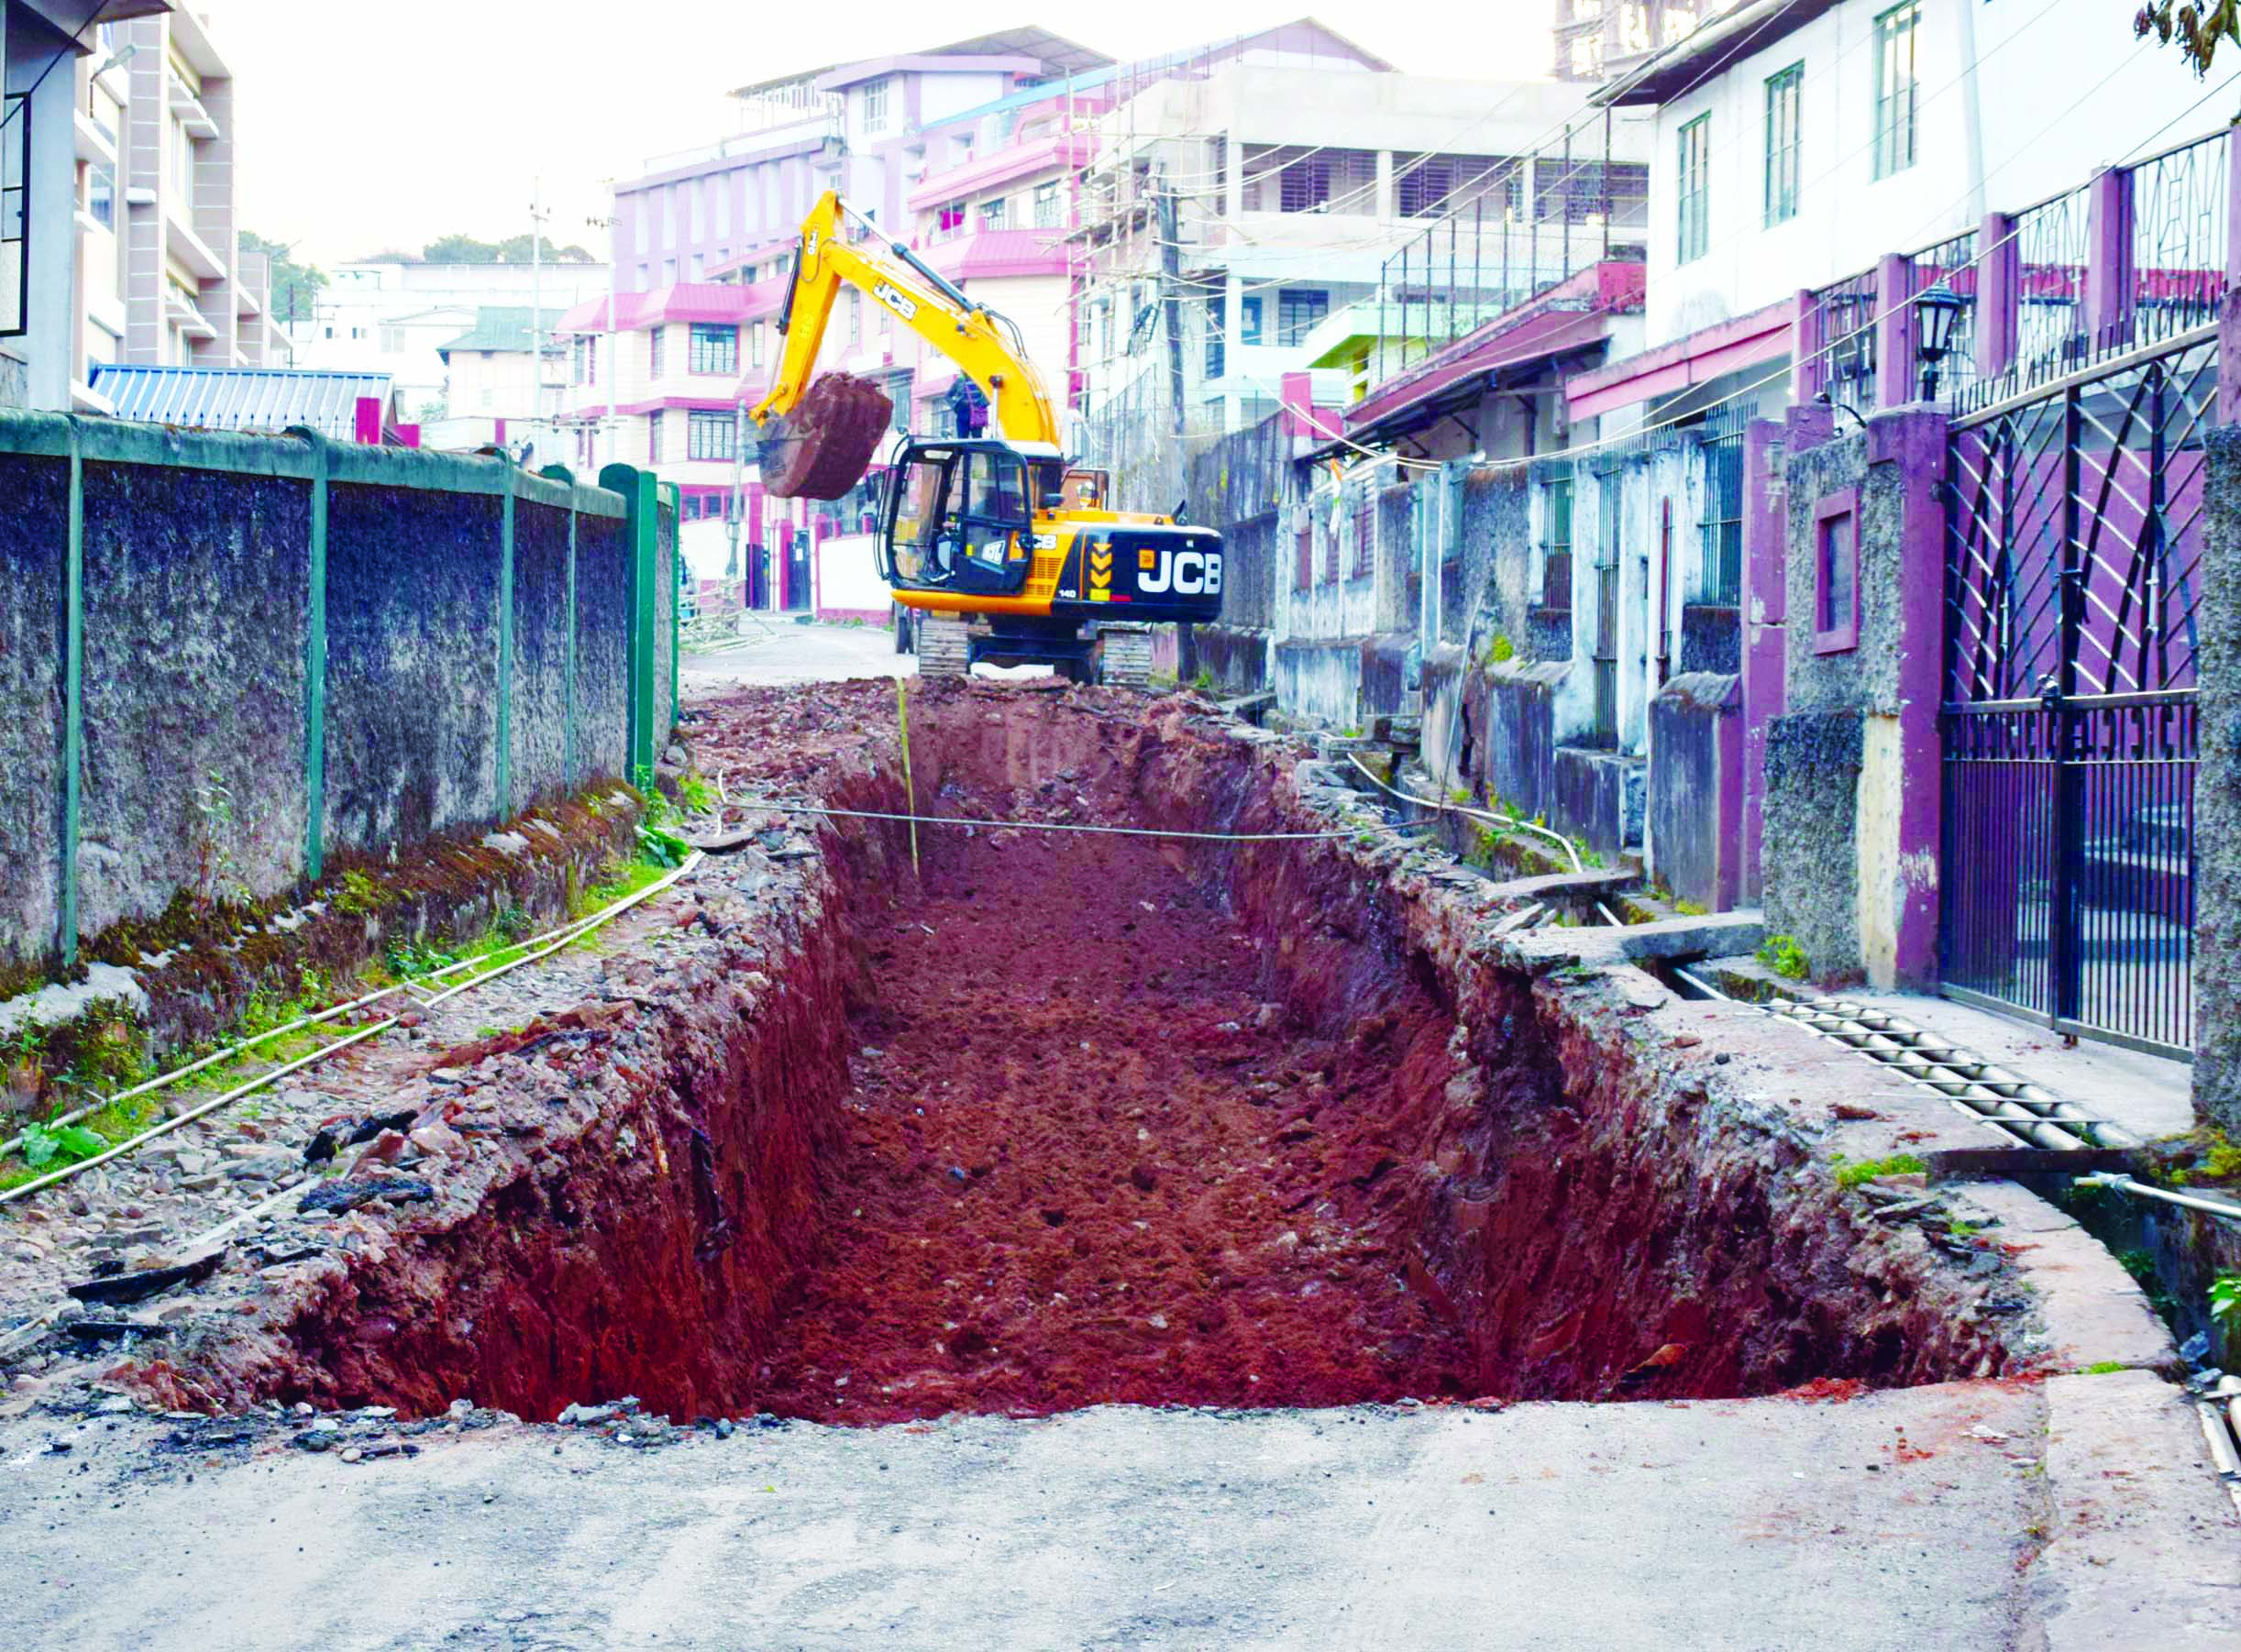 Feasibility concerns topple infra ambitions of M’laya – The Shillong Times